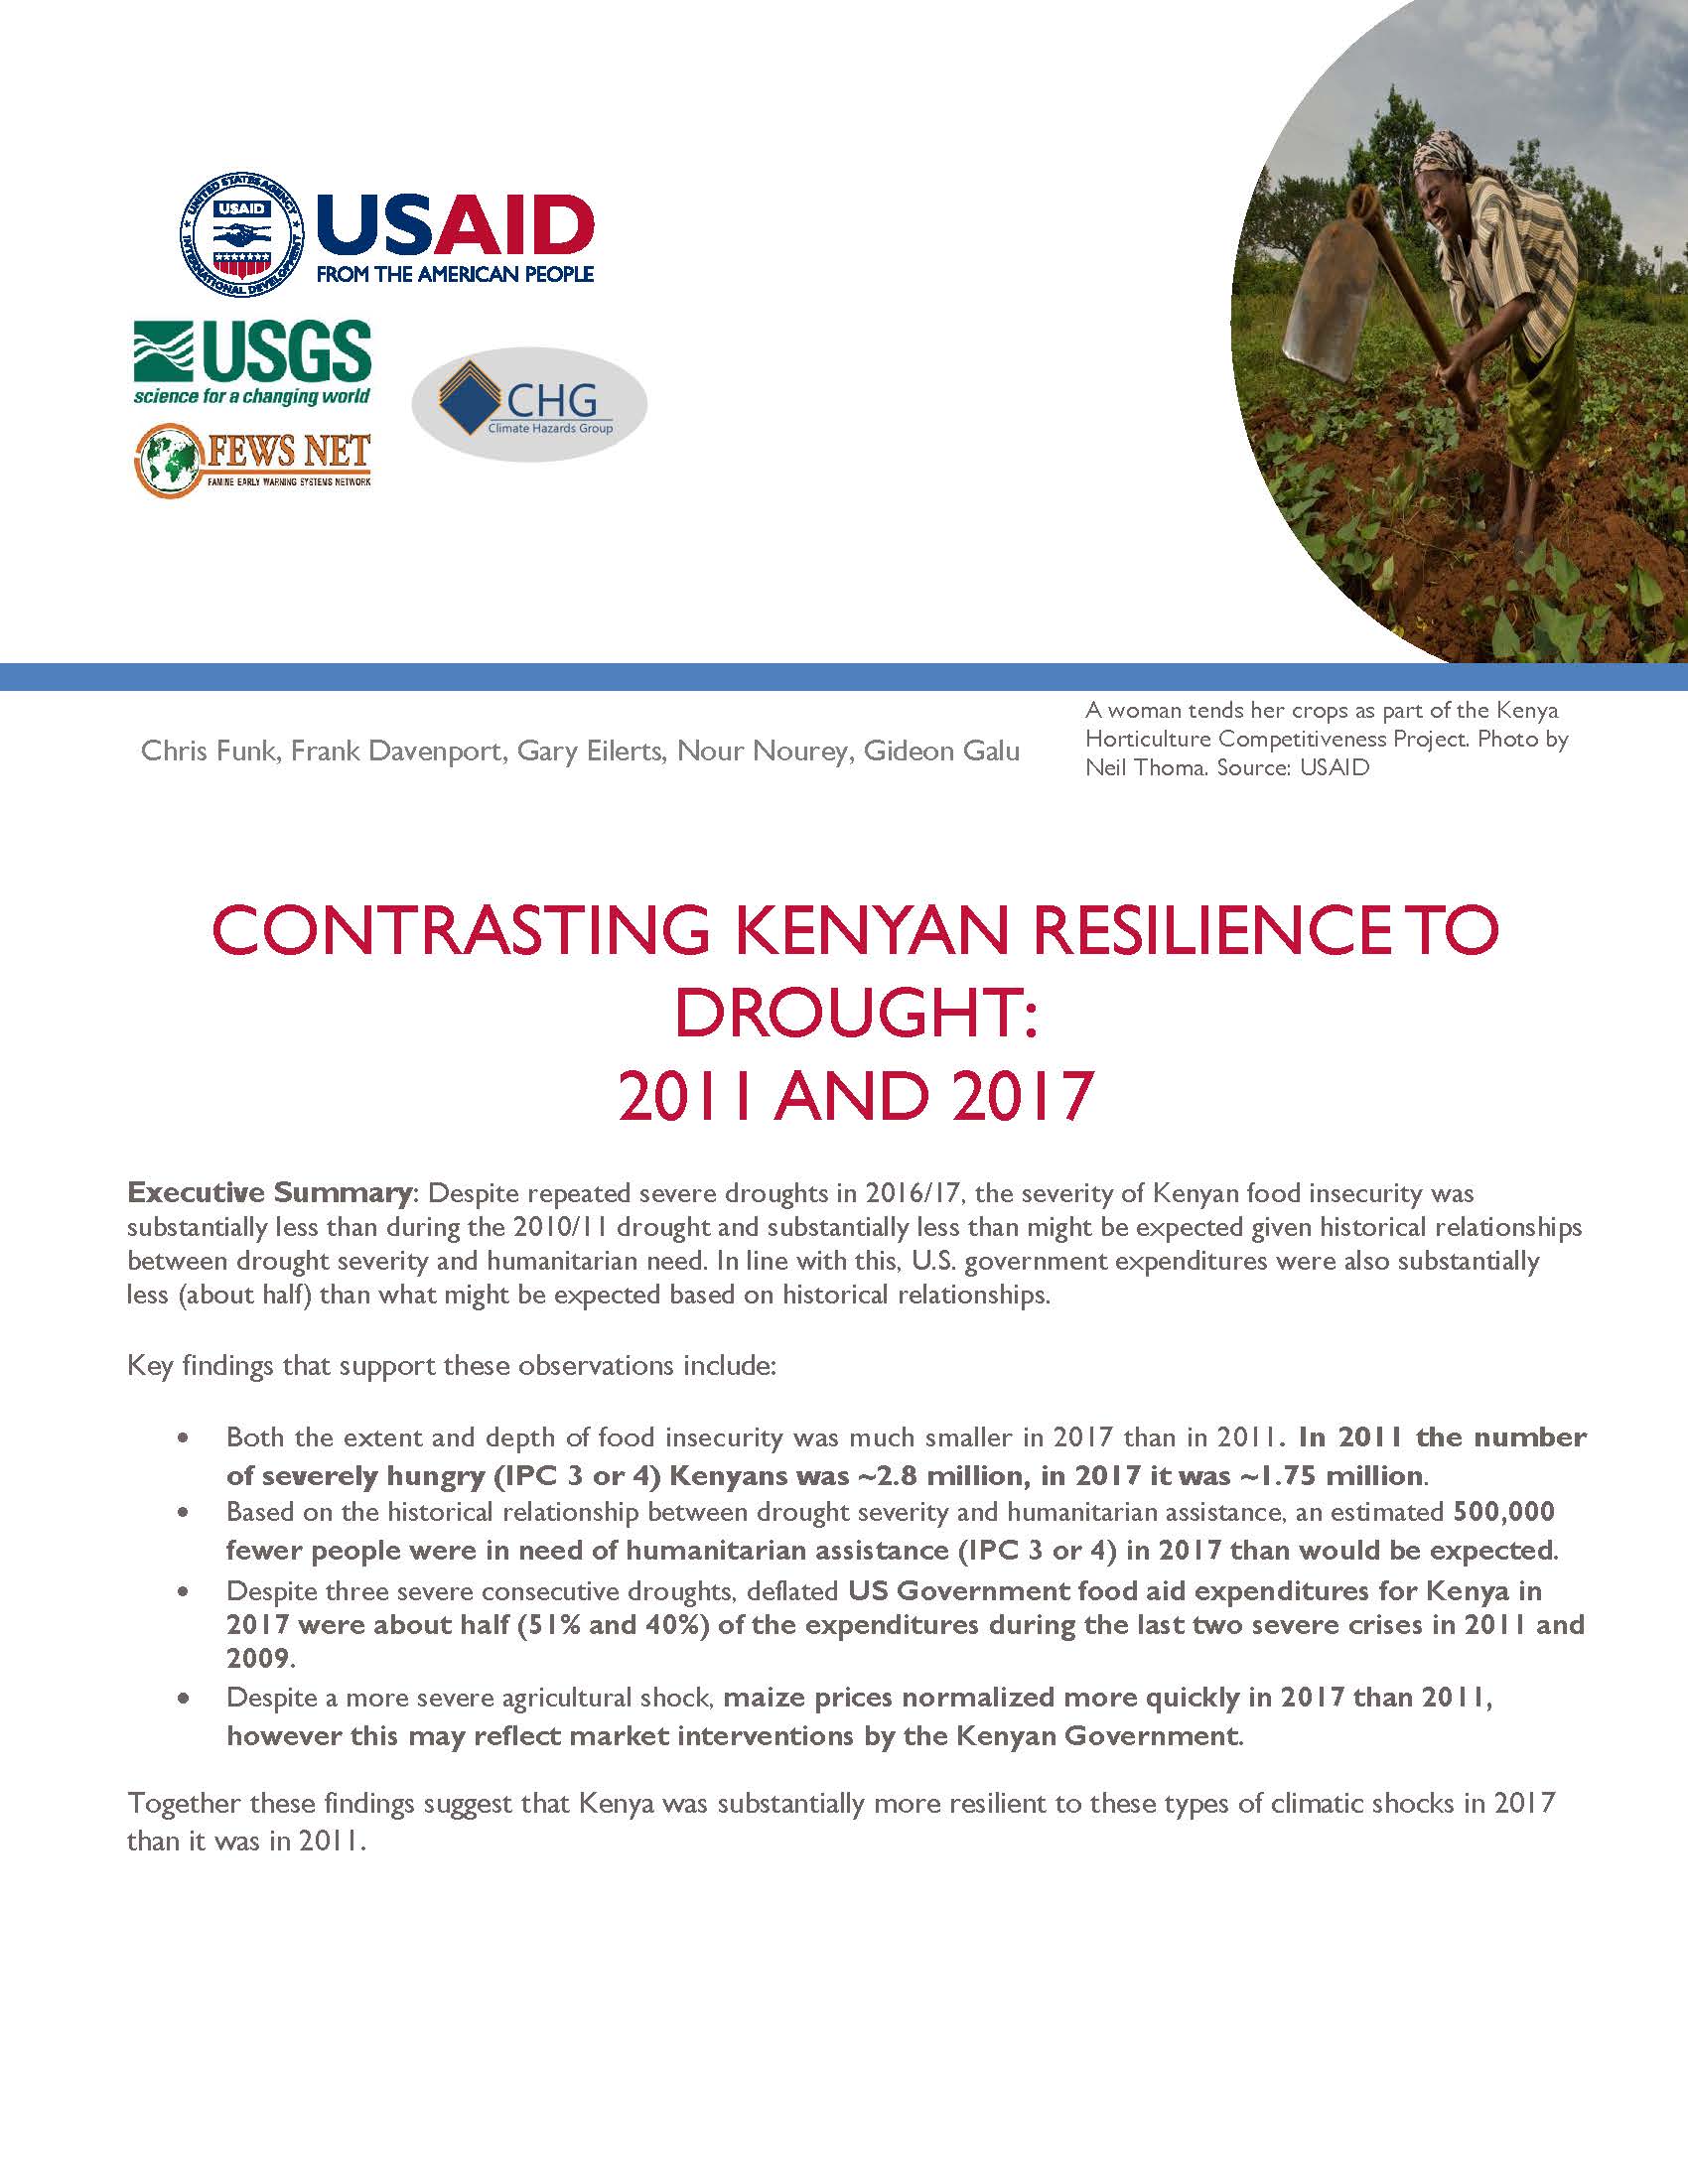 The full version of the Contrasting Kenyan Resilience to Drought: 2011 to 2017 report